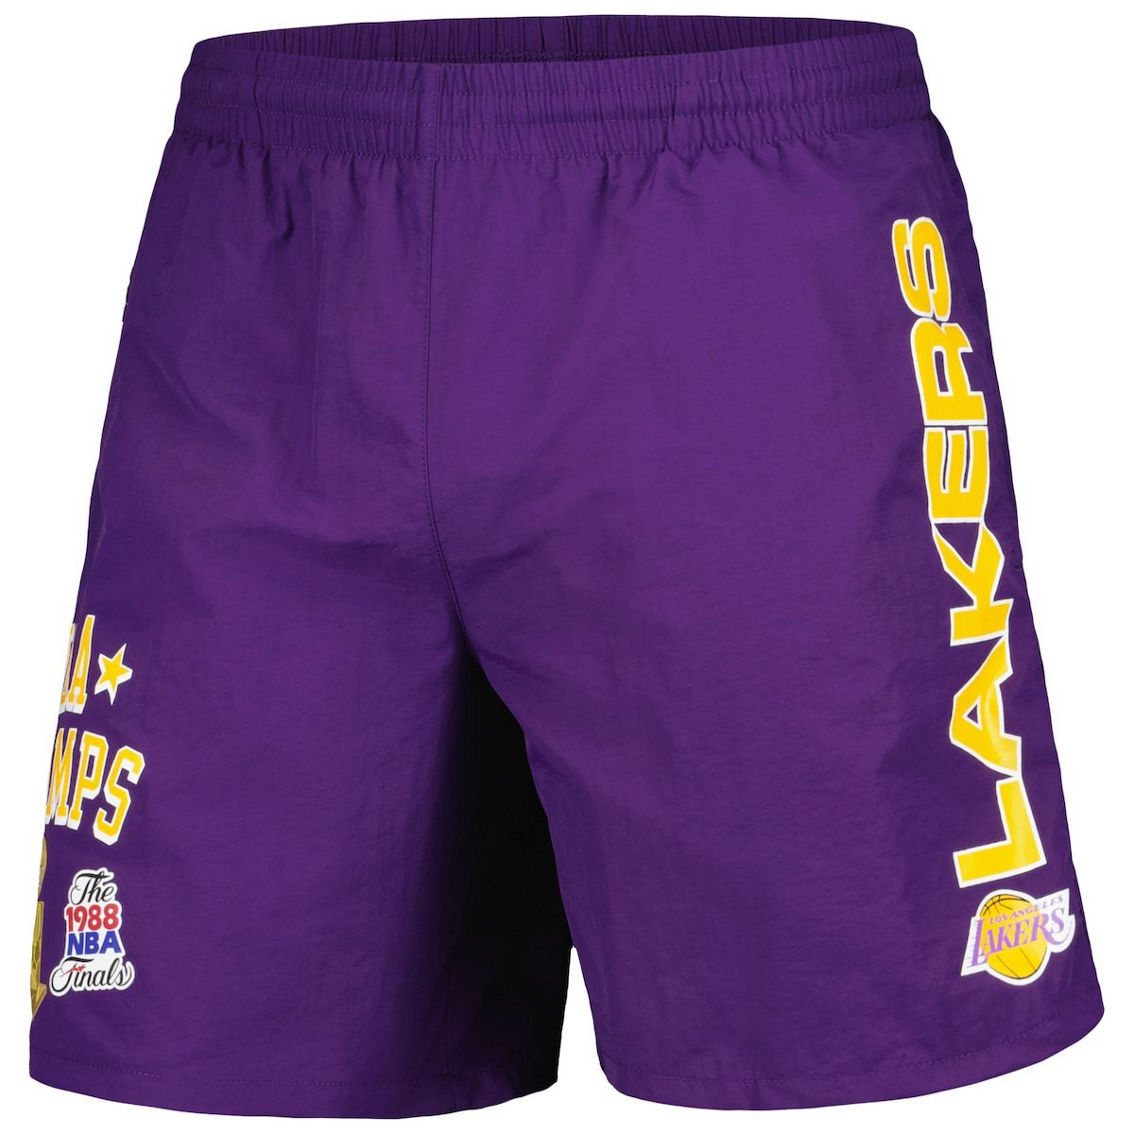 Mitchell & Ness Men's Purple Los Angeles Lakers 1988 Finals s Heritage Shorts - Image 3 of 4